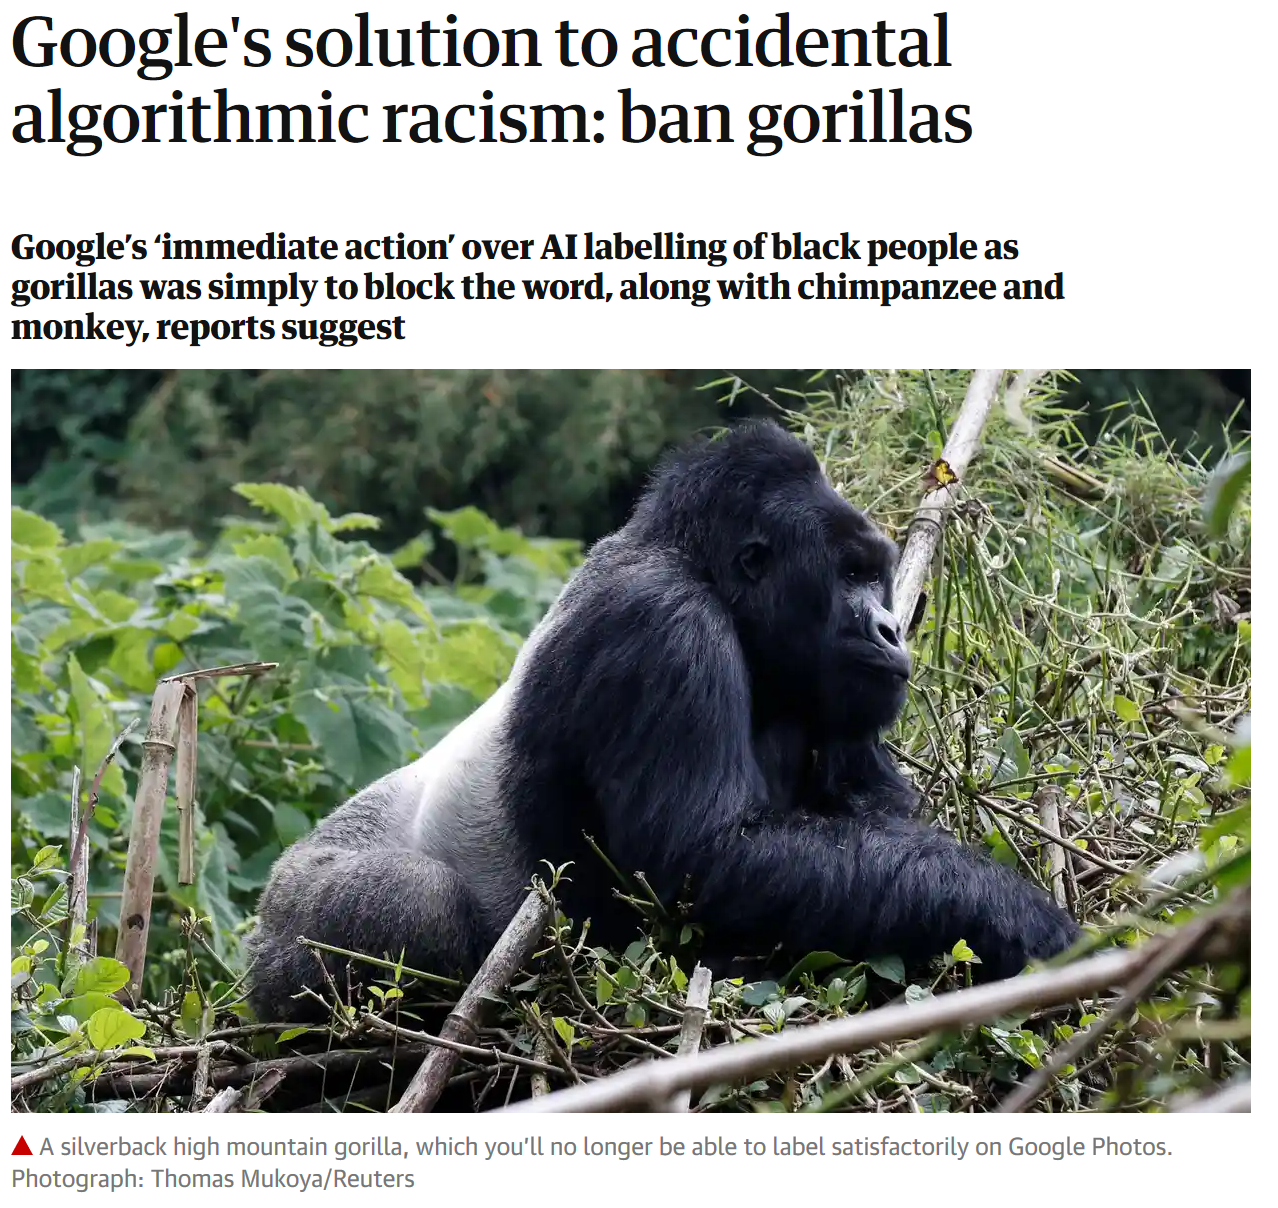 Pictures of a headlines from the Guardian, showing Google removed gorillas and other moneys from the possible labels of its algorithm